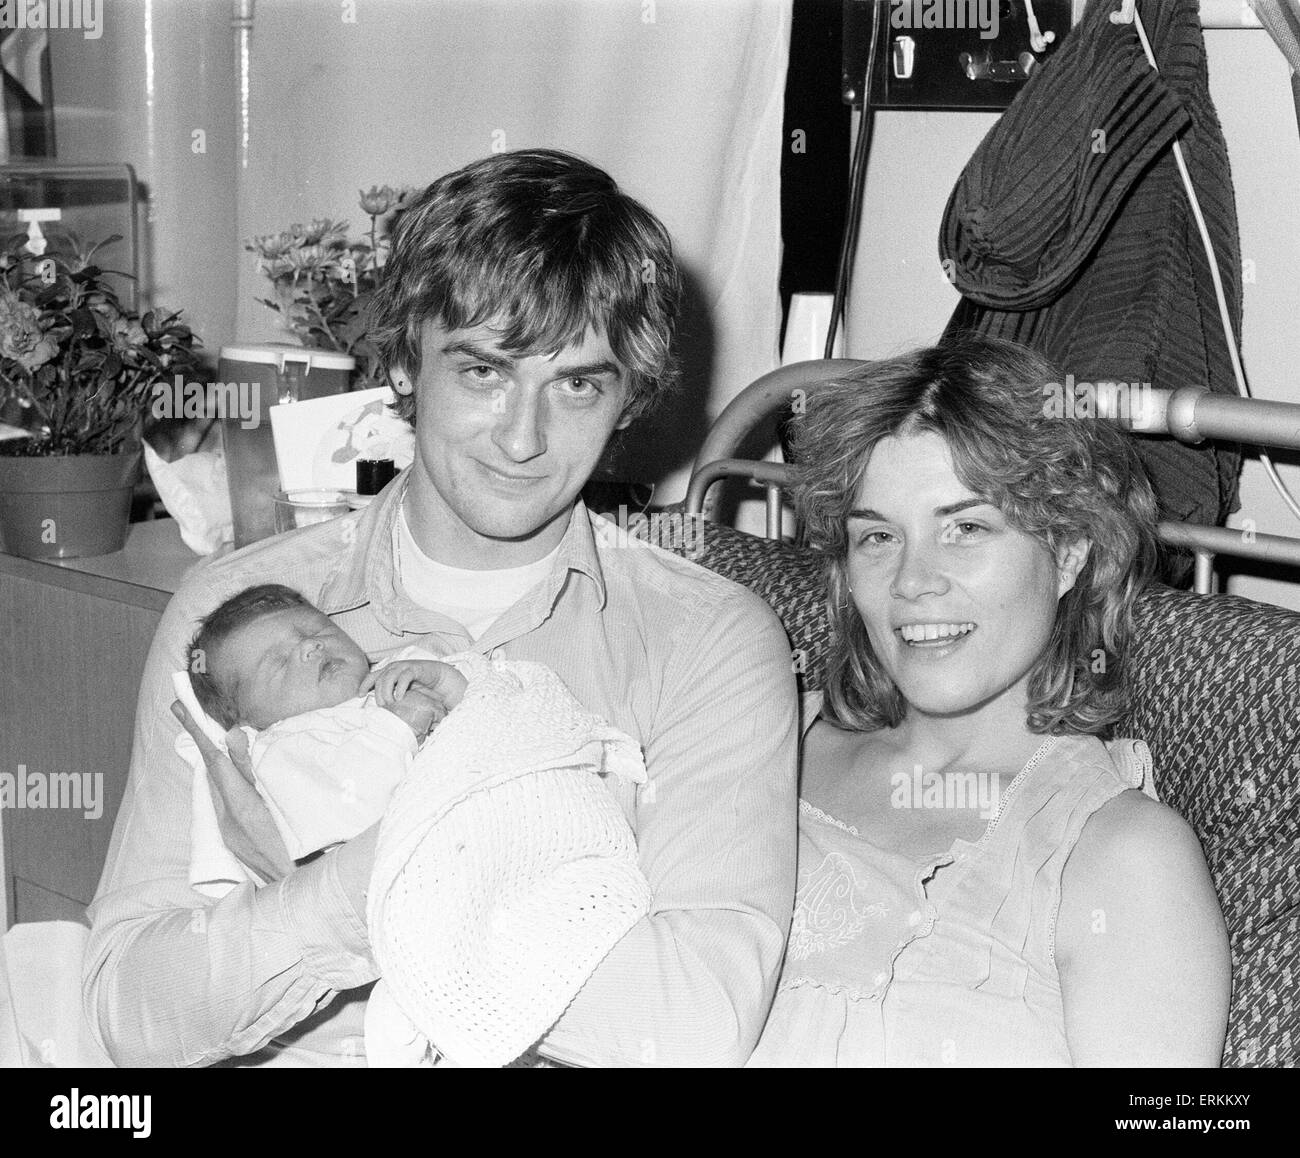 Mike Oldfield, musician and composer, pictured with newborn baby daughter Molly and partner Sally Cooper, 3rd December 1979. Stock Photo